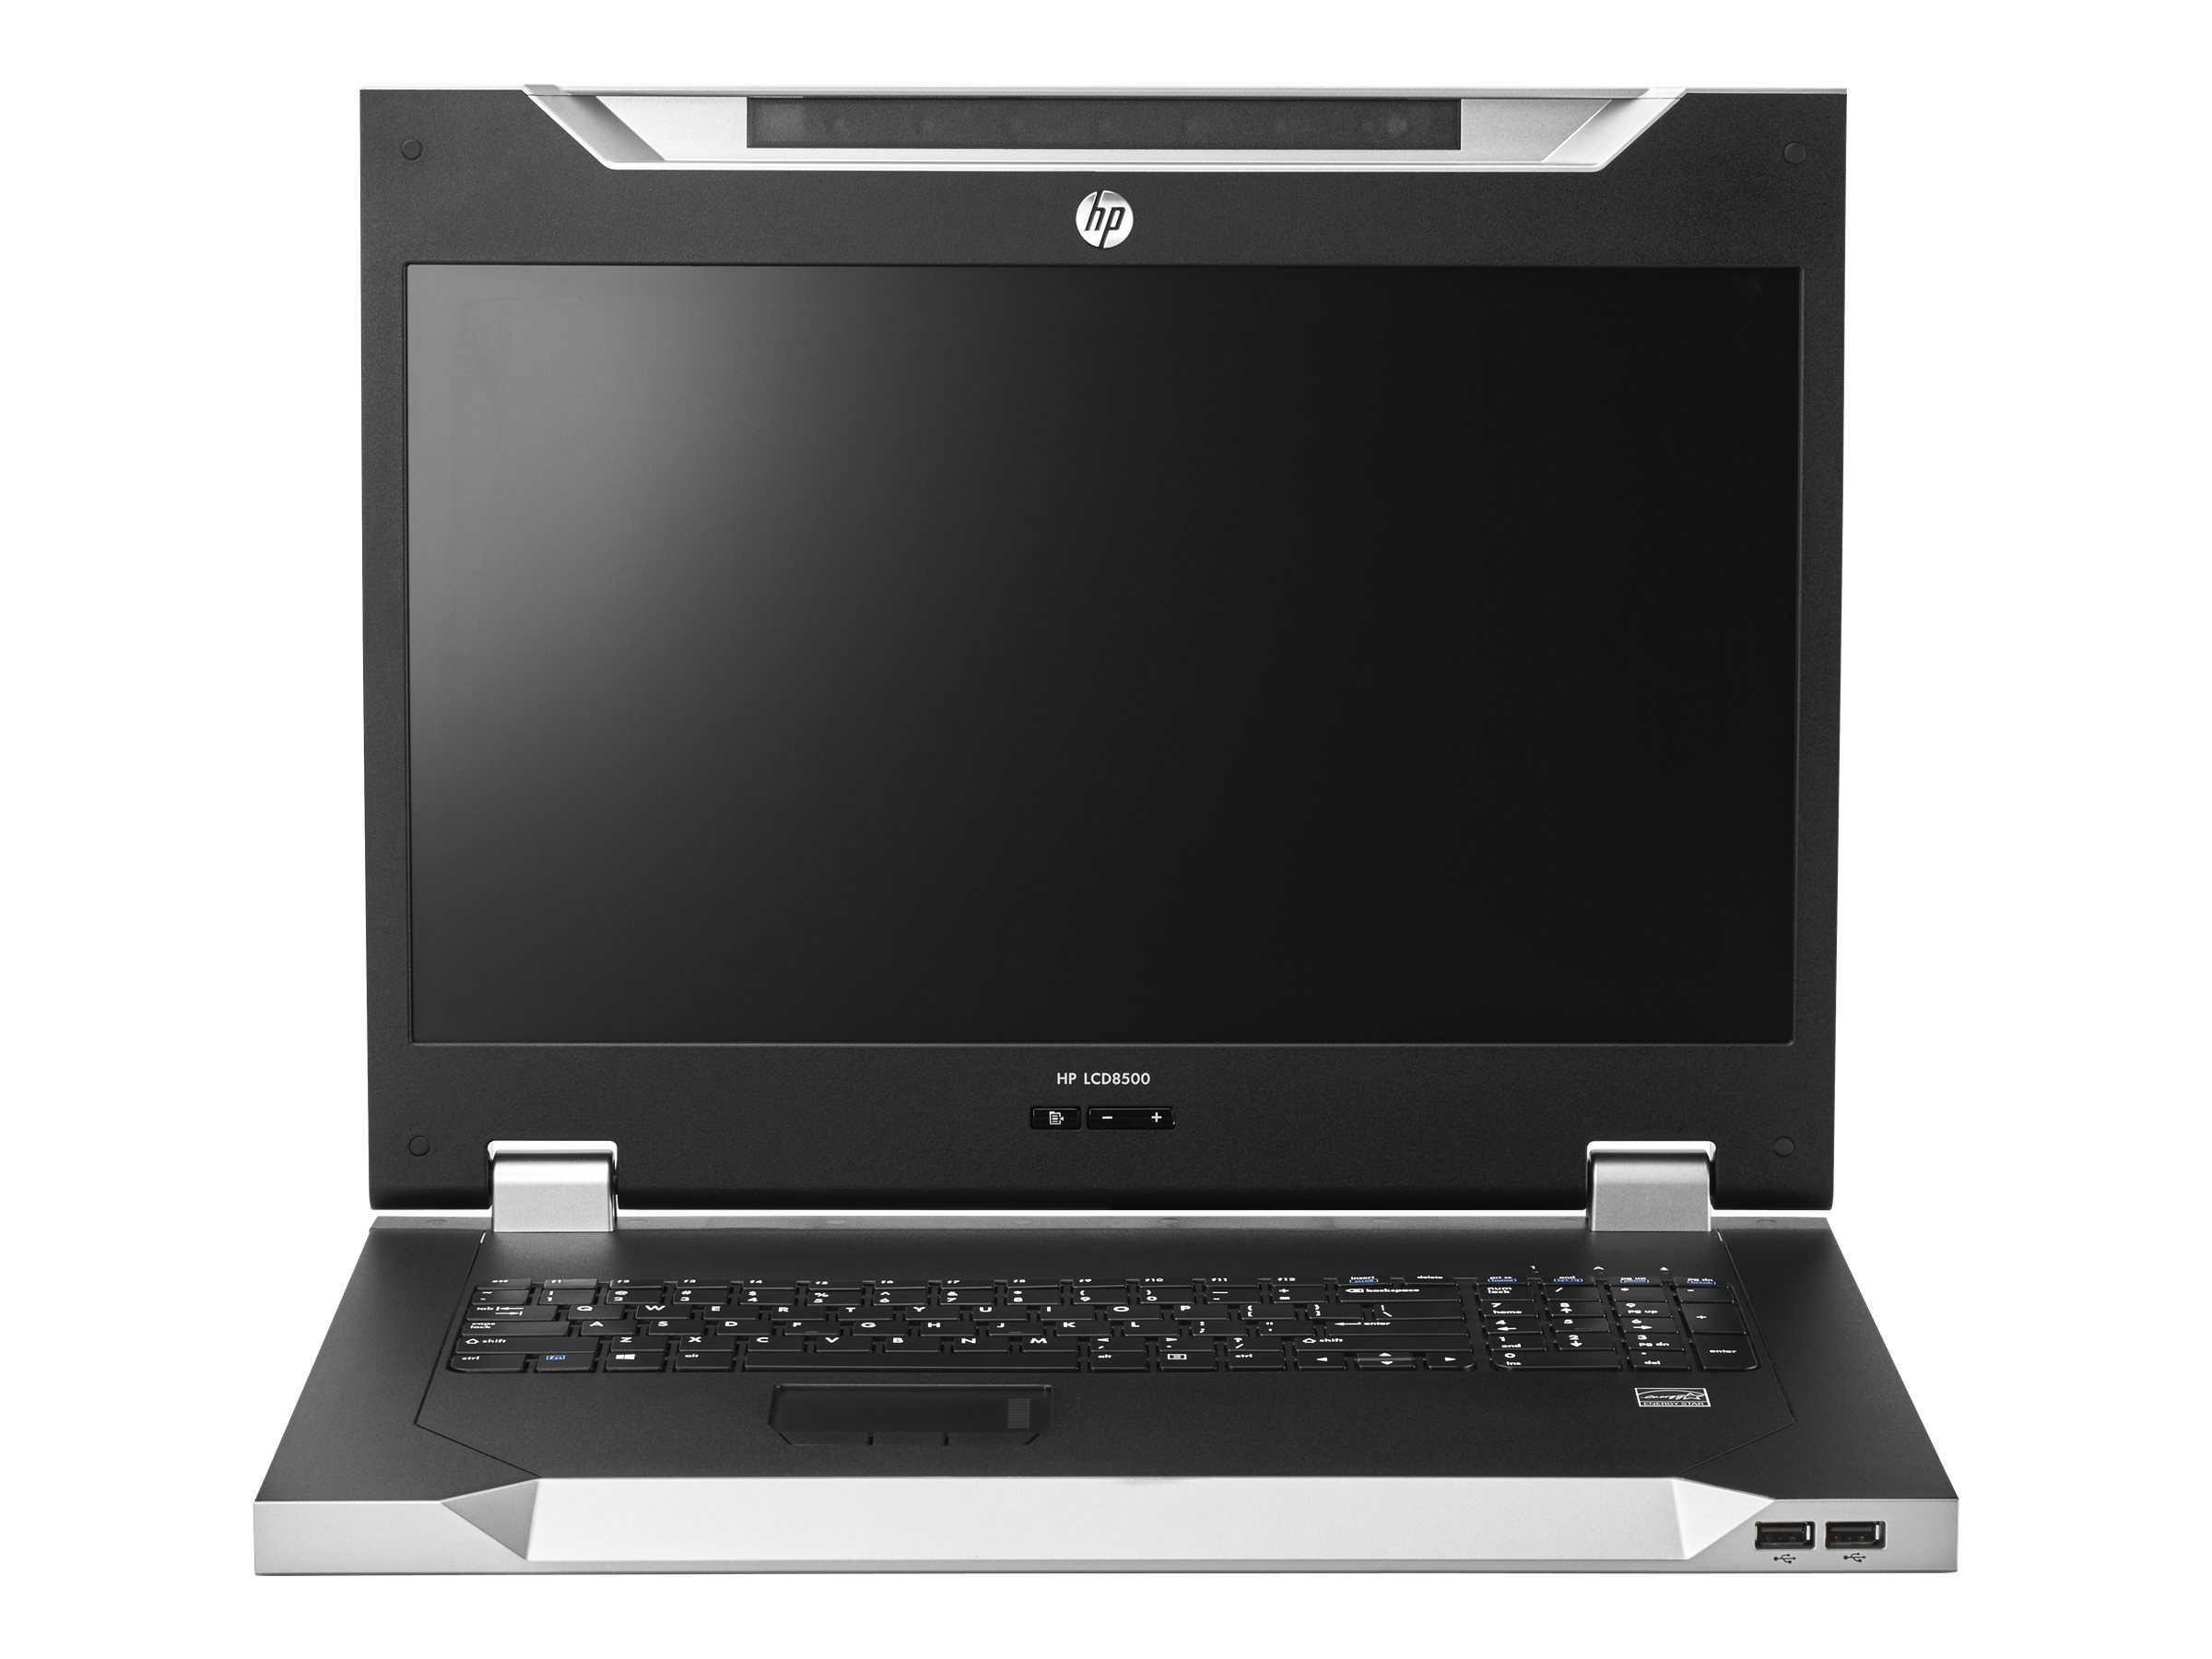 HP LCD 8500 1U Console US Kit (AF630A)